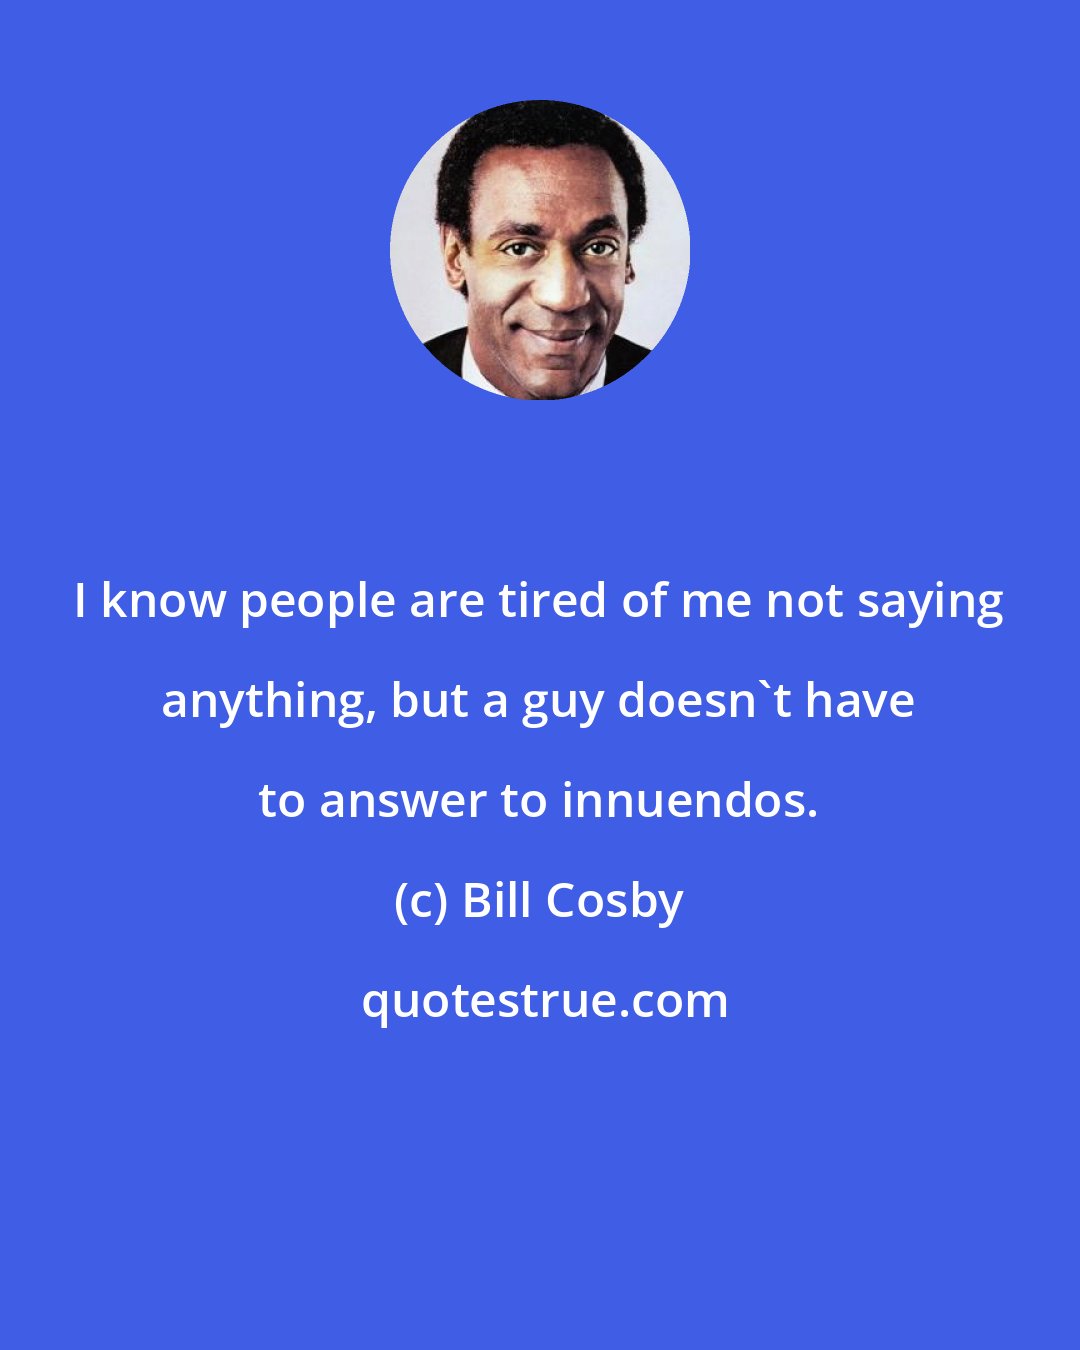 Bill Cosby: I know people are tired of me not saying anything, but a guy doesn't have to answer to innuendos.